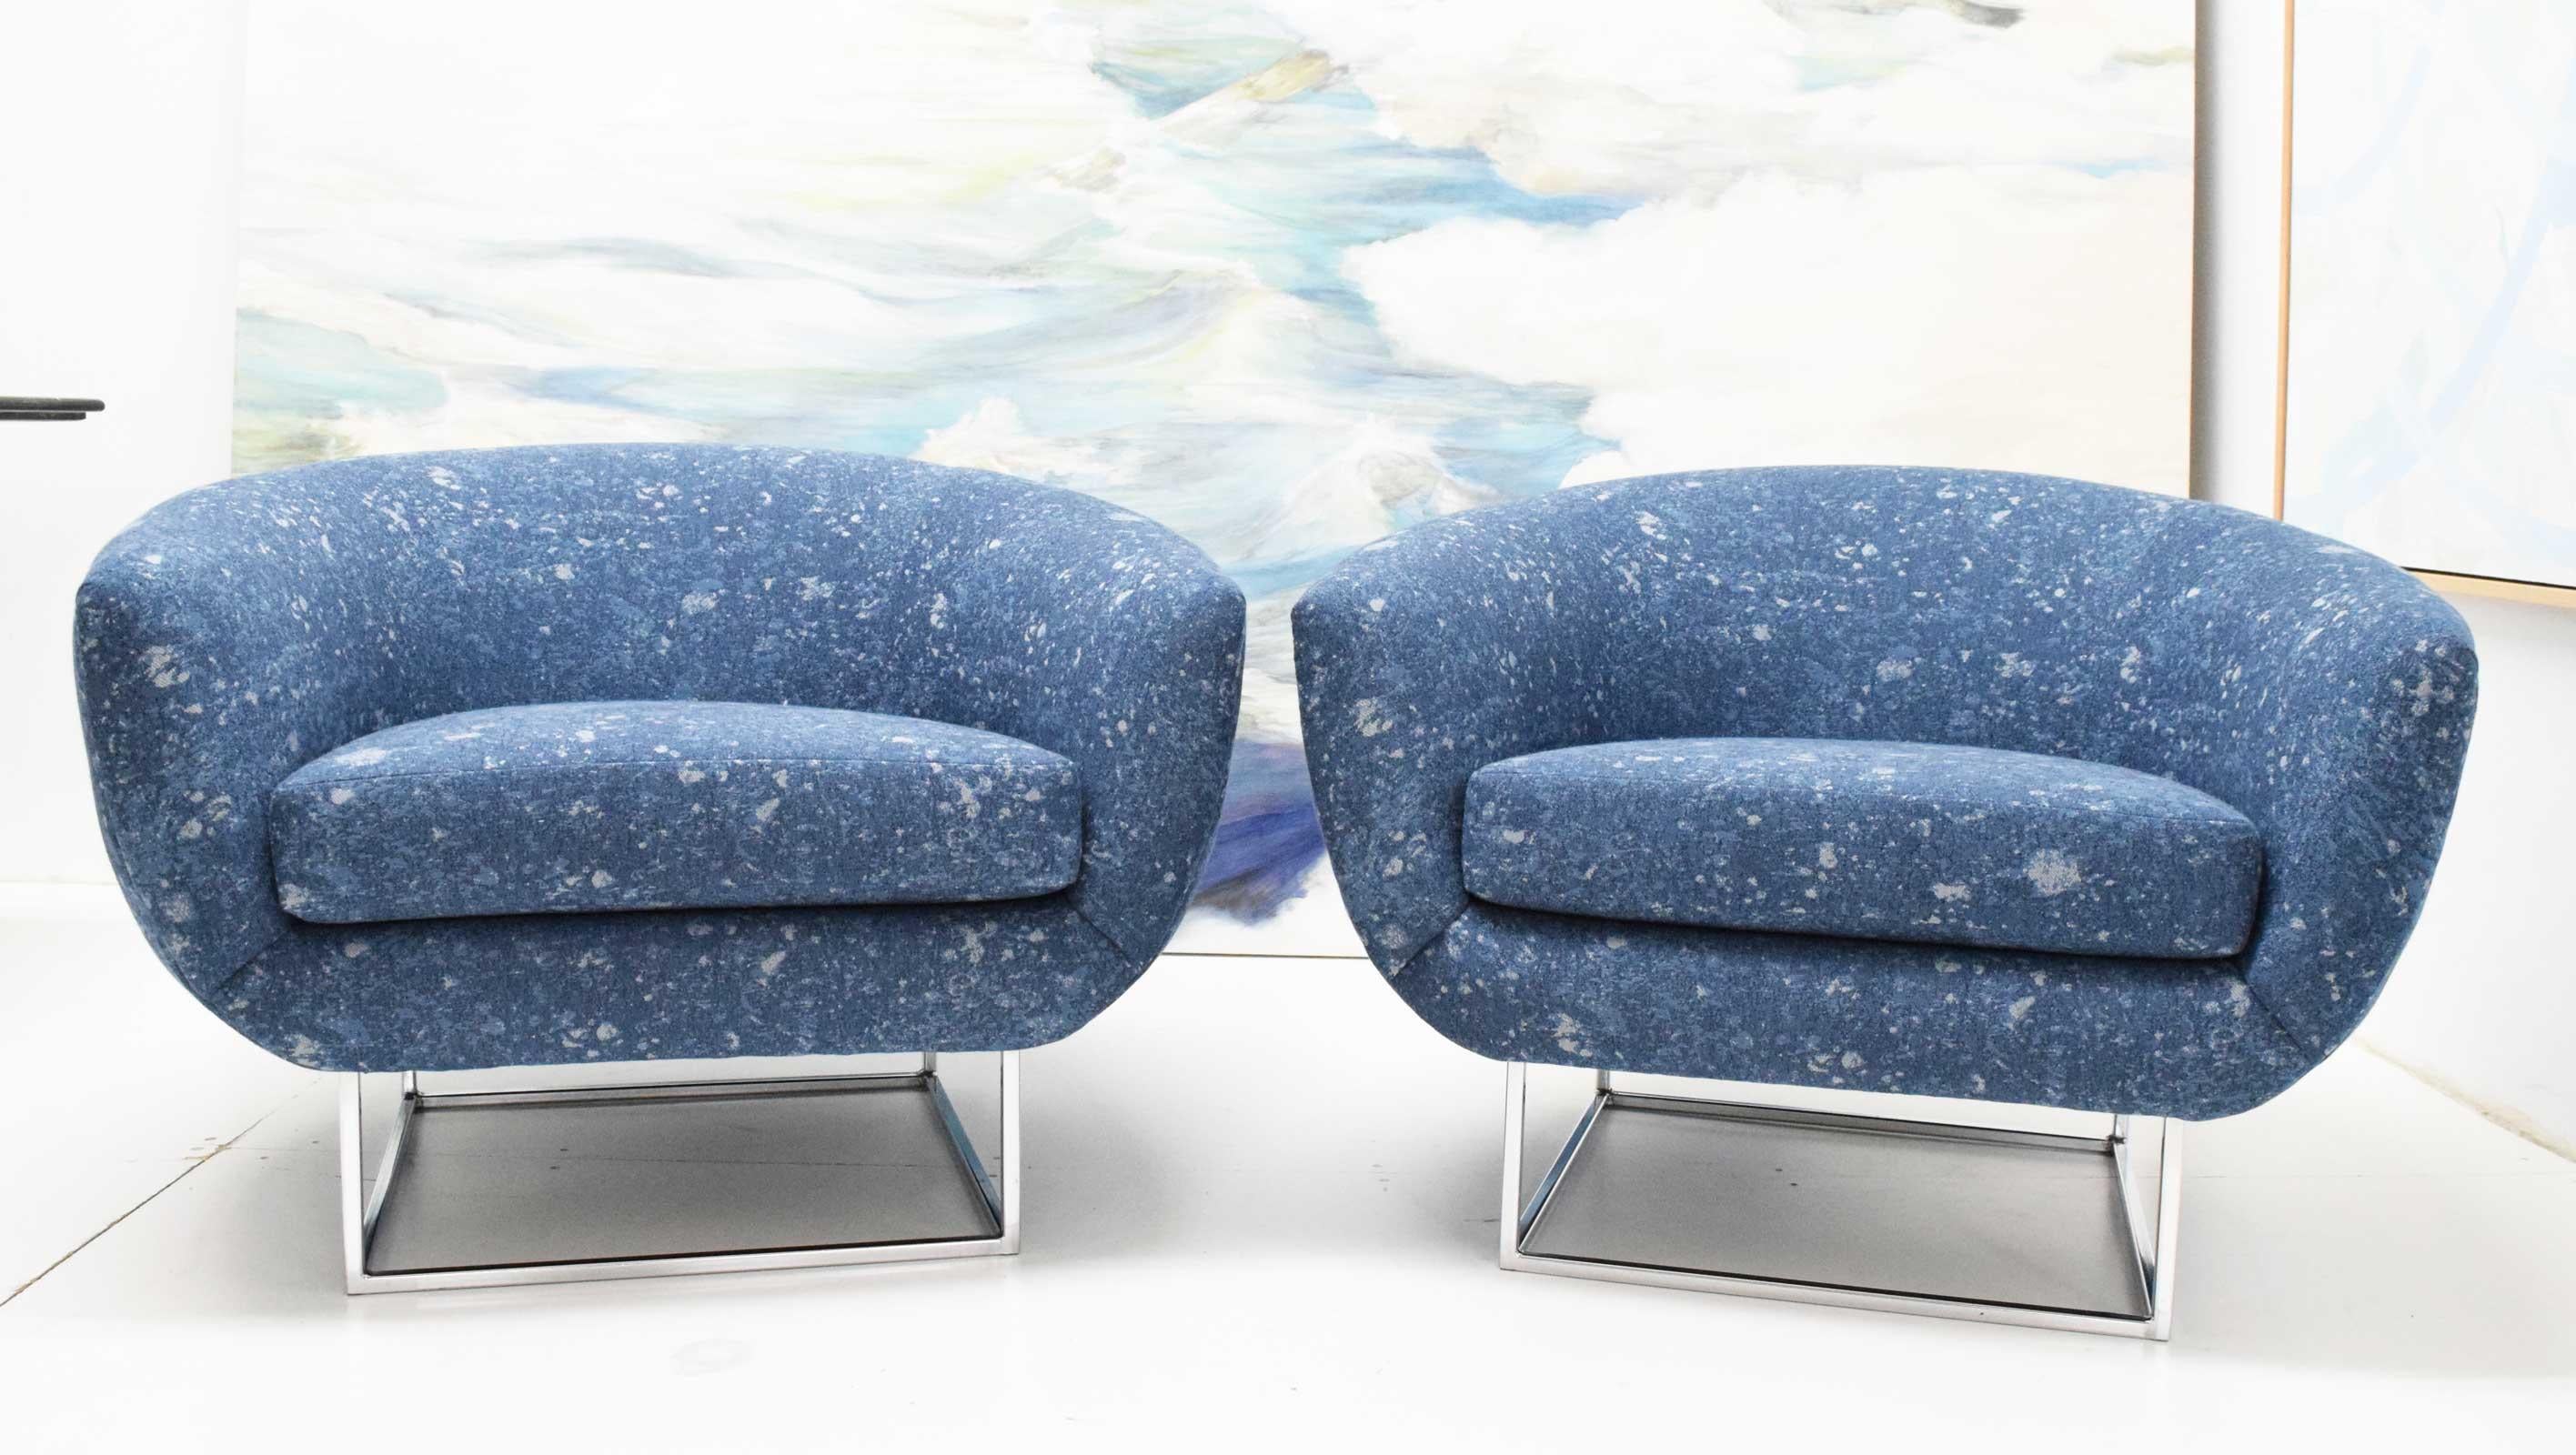 A great looking pair of overstuffed lounge chairs by Milo Baughman. You don't see these too often. They have a beautiful square chrome base. We updated the look with new upholstery by Donghia so they are fresh and ready to go.